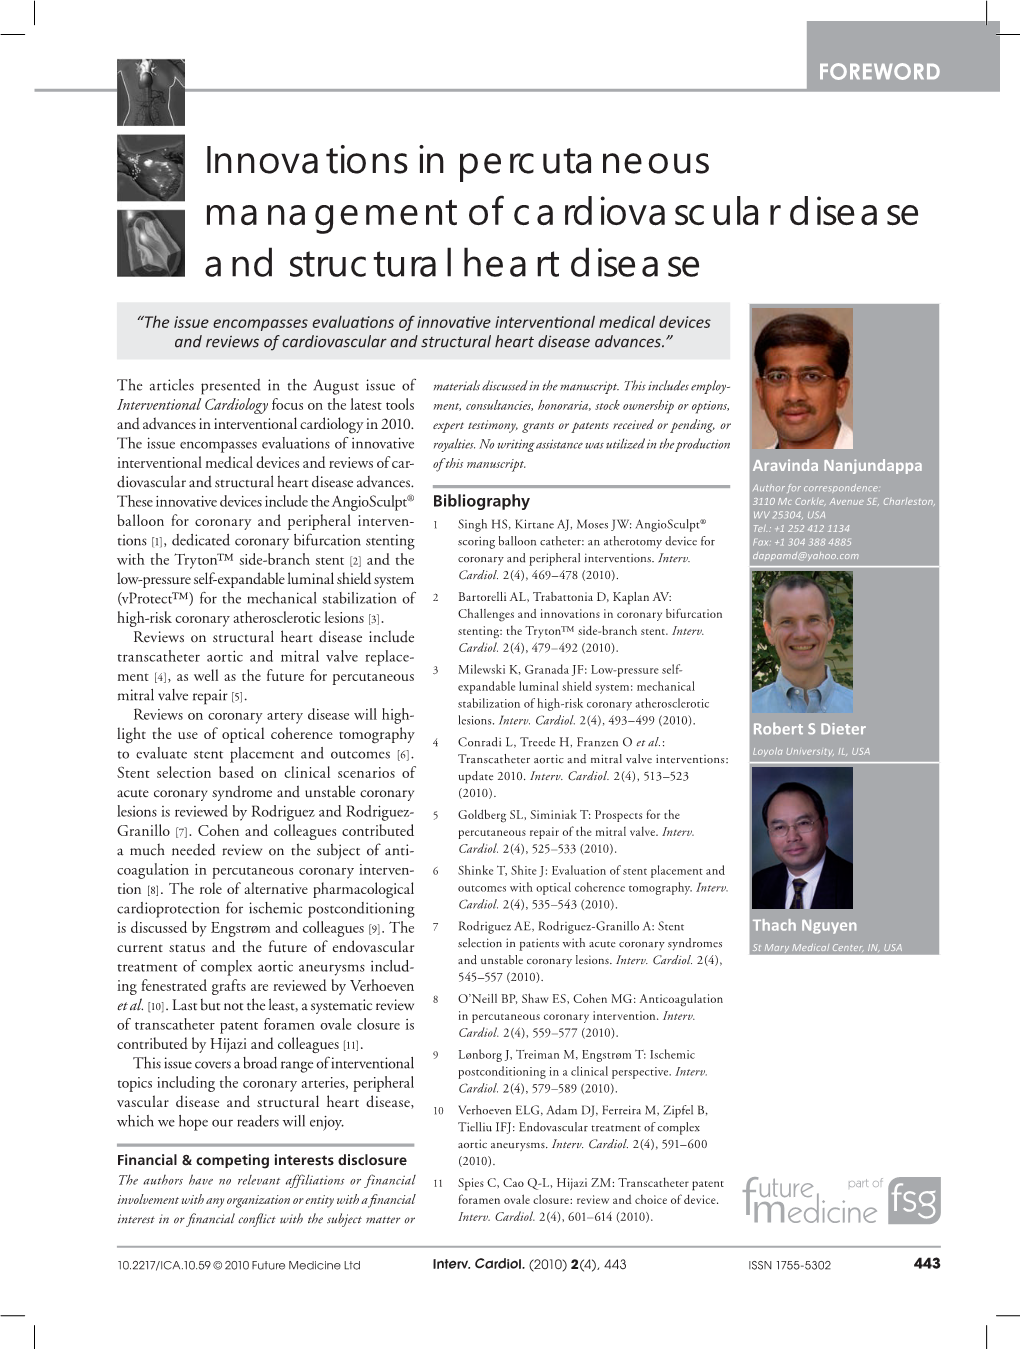 Innovations in Percutaneous Management of Cardiovascular Disease and Structural Heart Disease